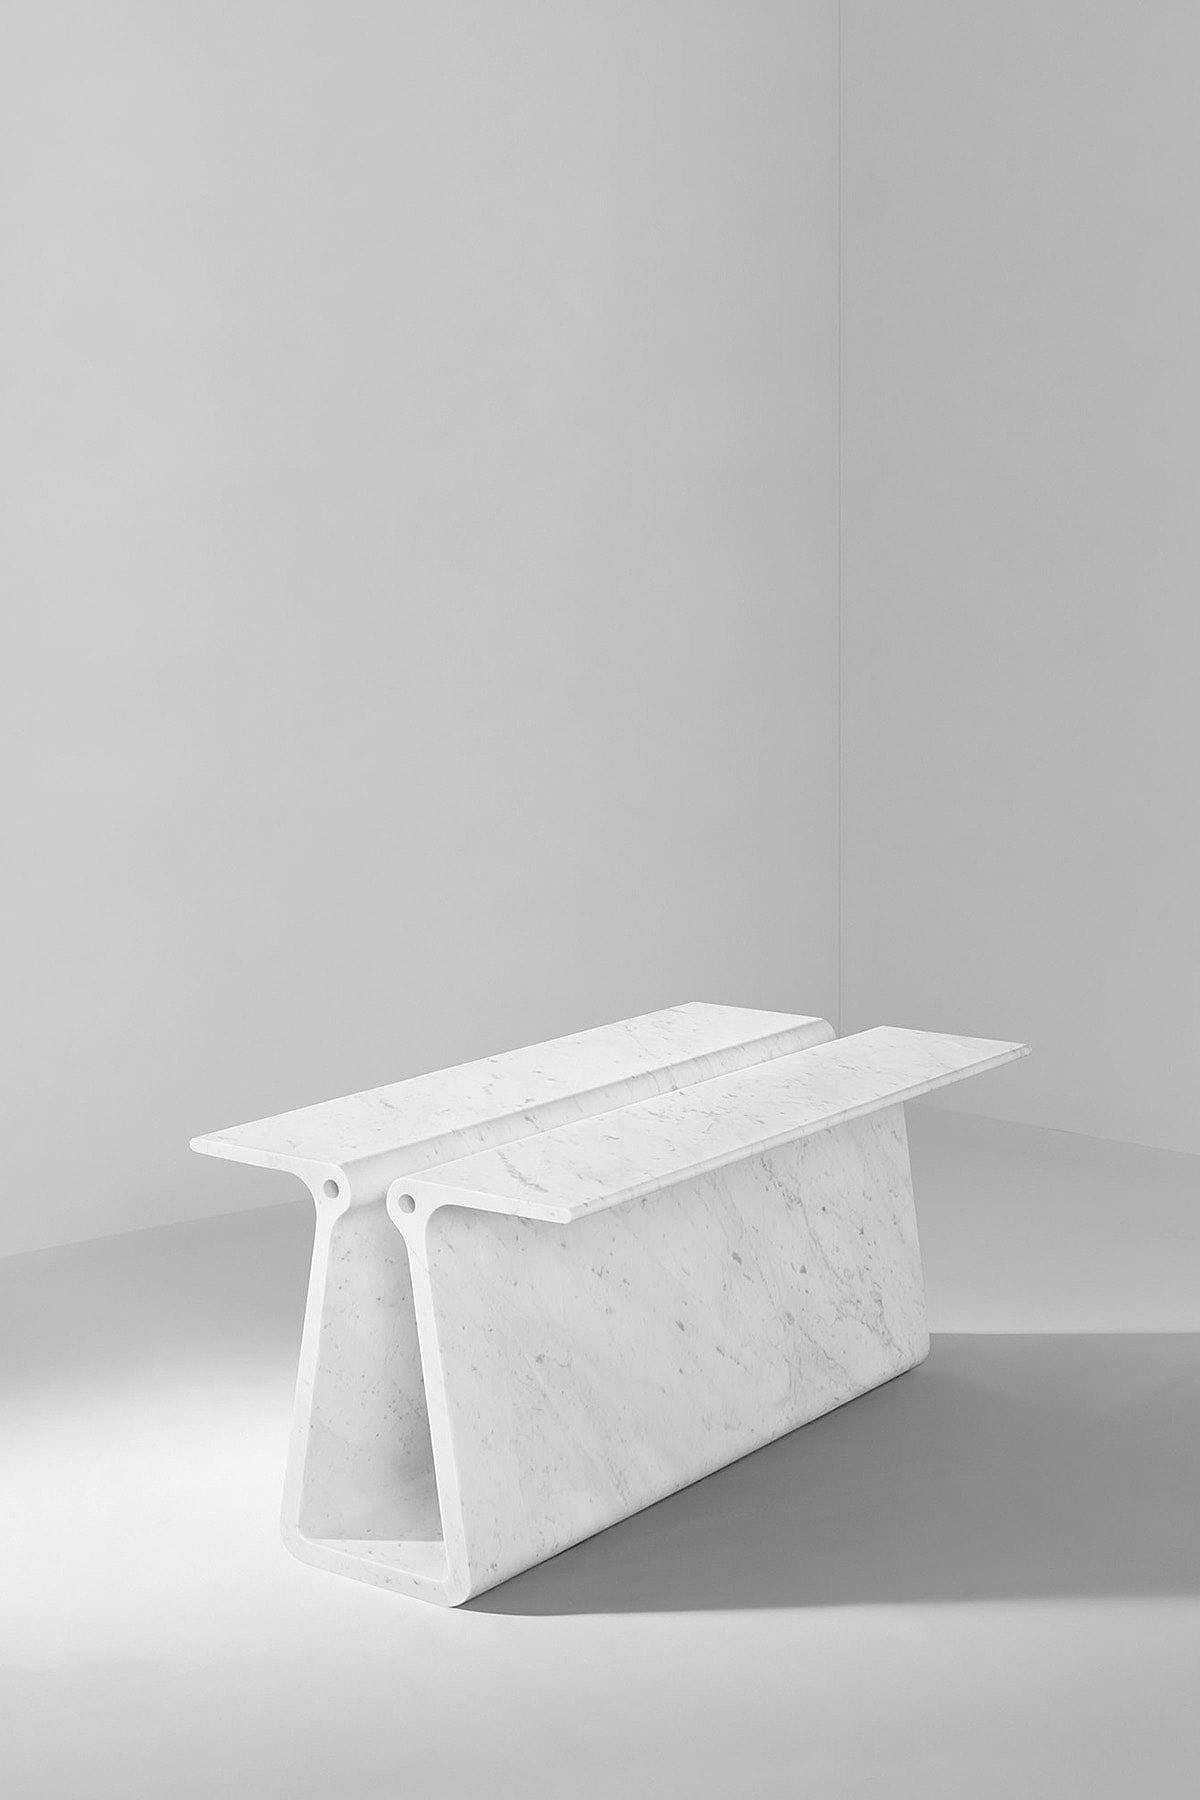 Extruded Tables，大理石，桌子，Marc Newson，